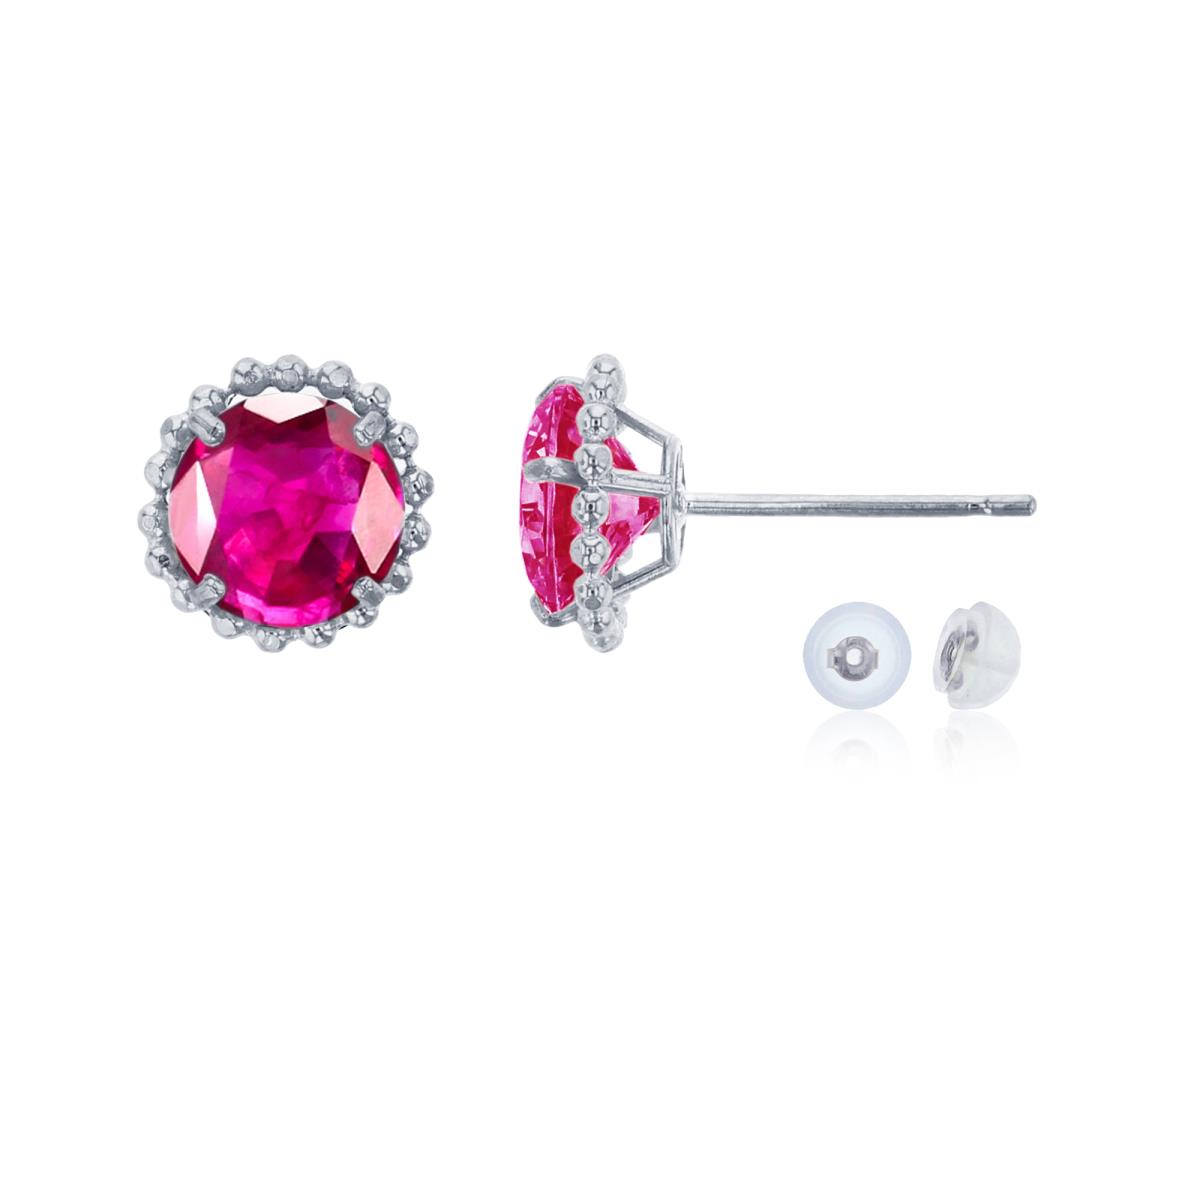 10K White Gold 5mm Rd Glass Filled Ruby with Bead Frame Stud Earring with Silicone Back